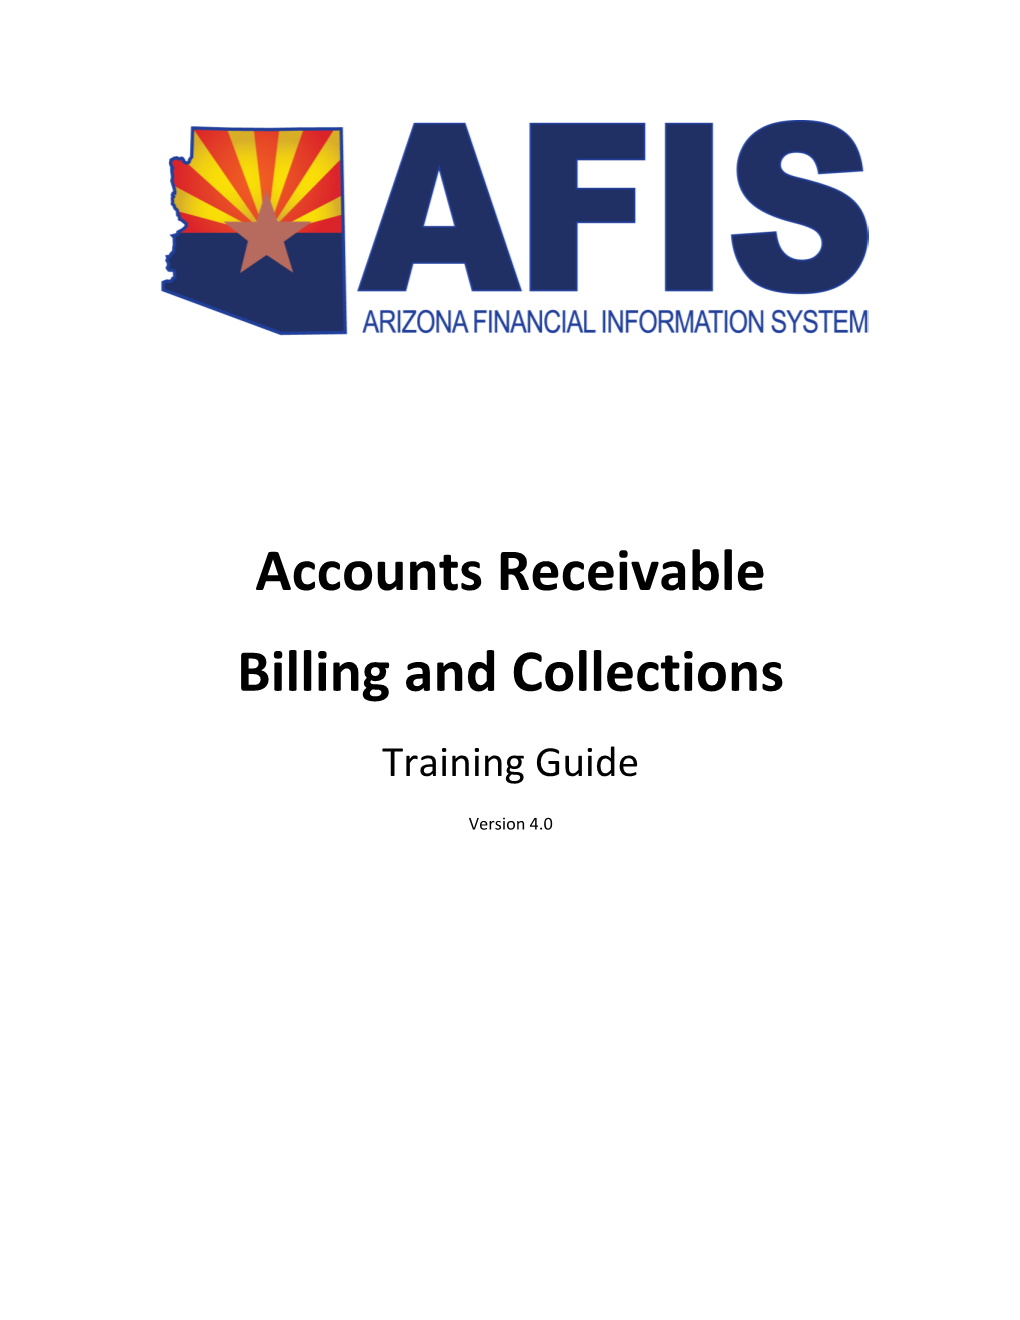 Accounts Receivable Billing and Collections Training Guide